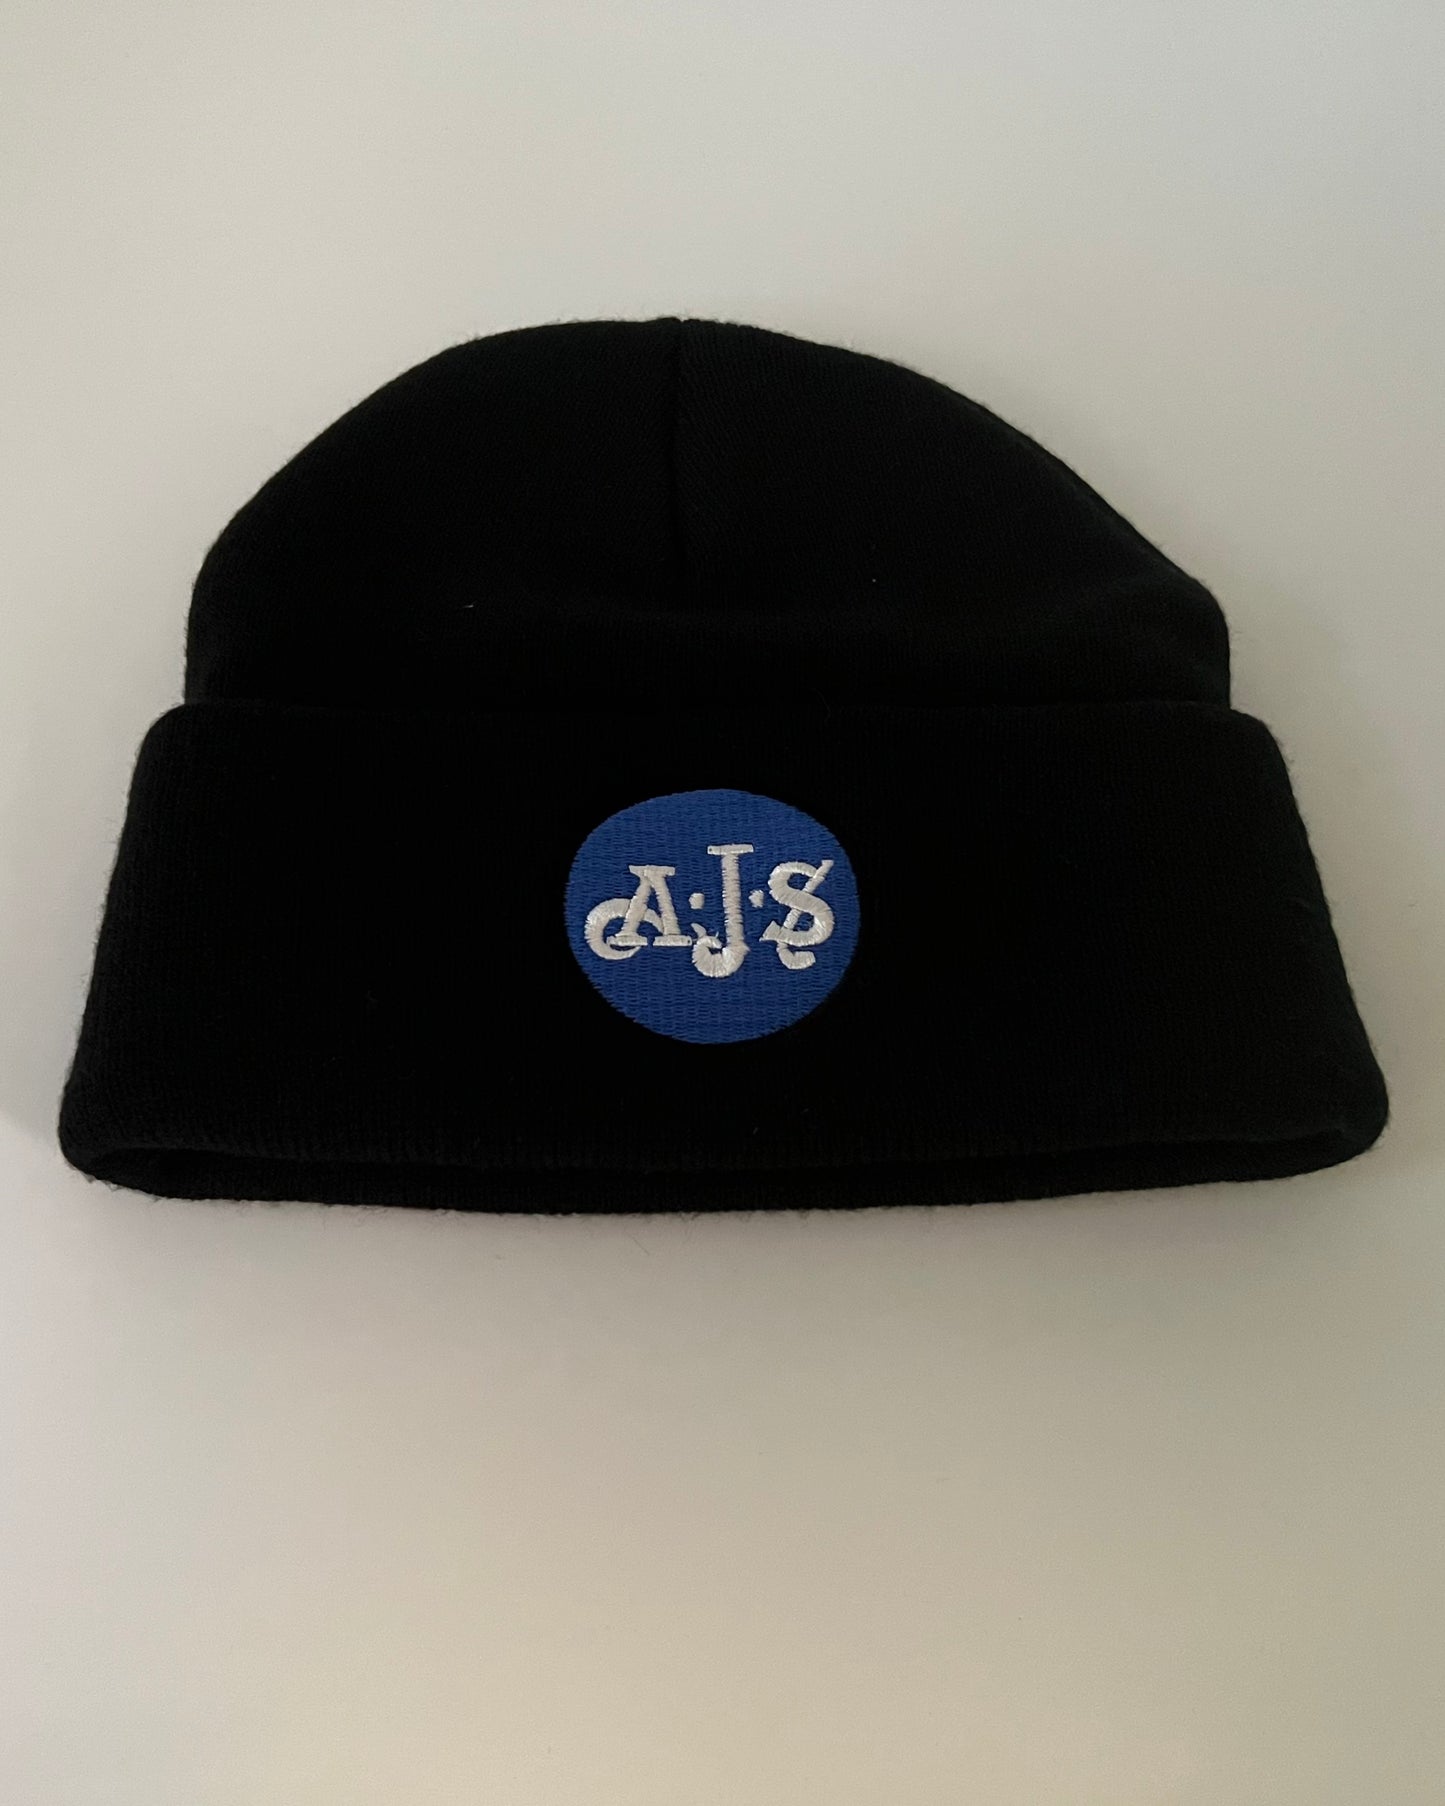 A.J.S Embroidered Beanie